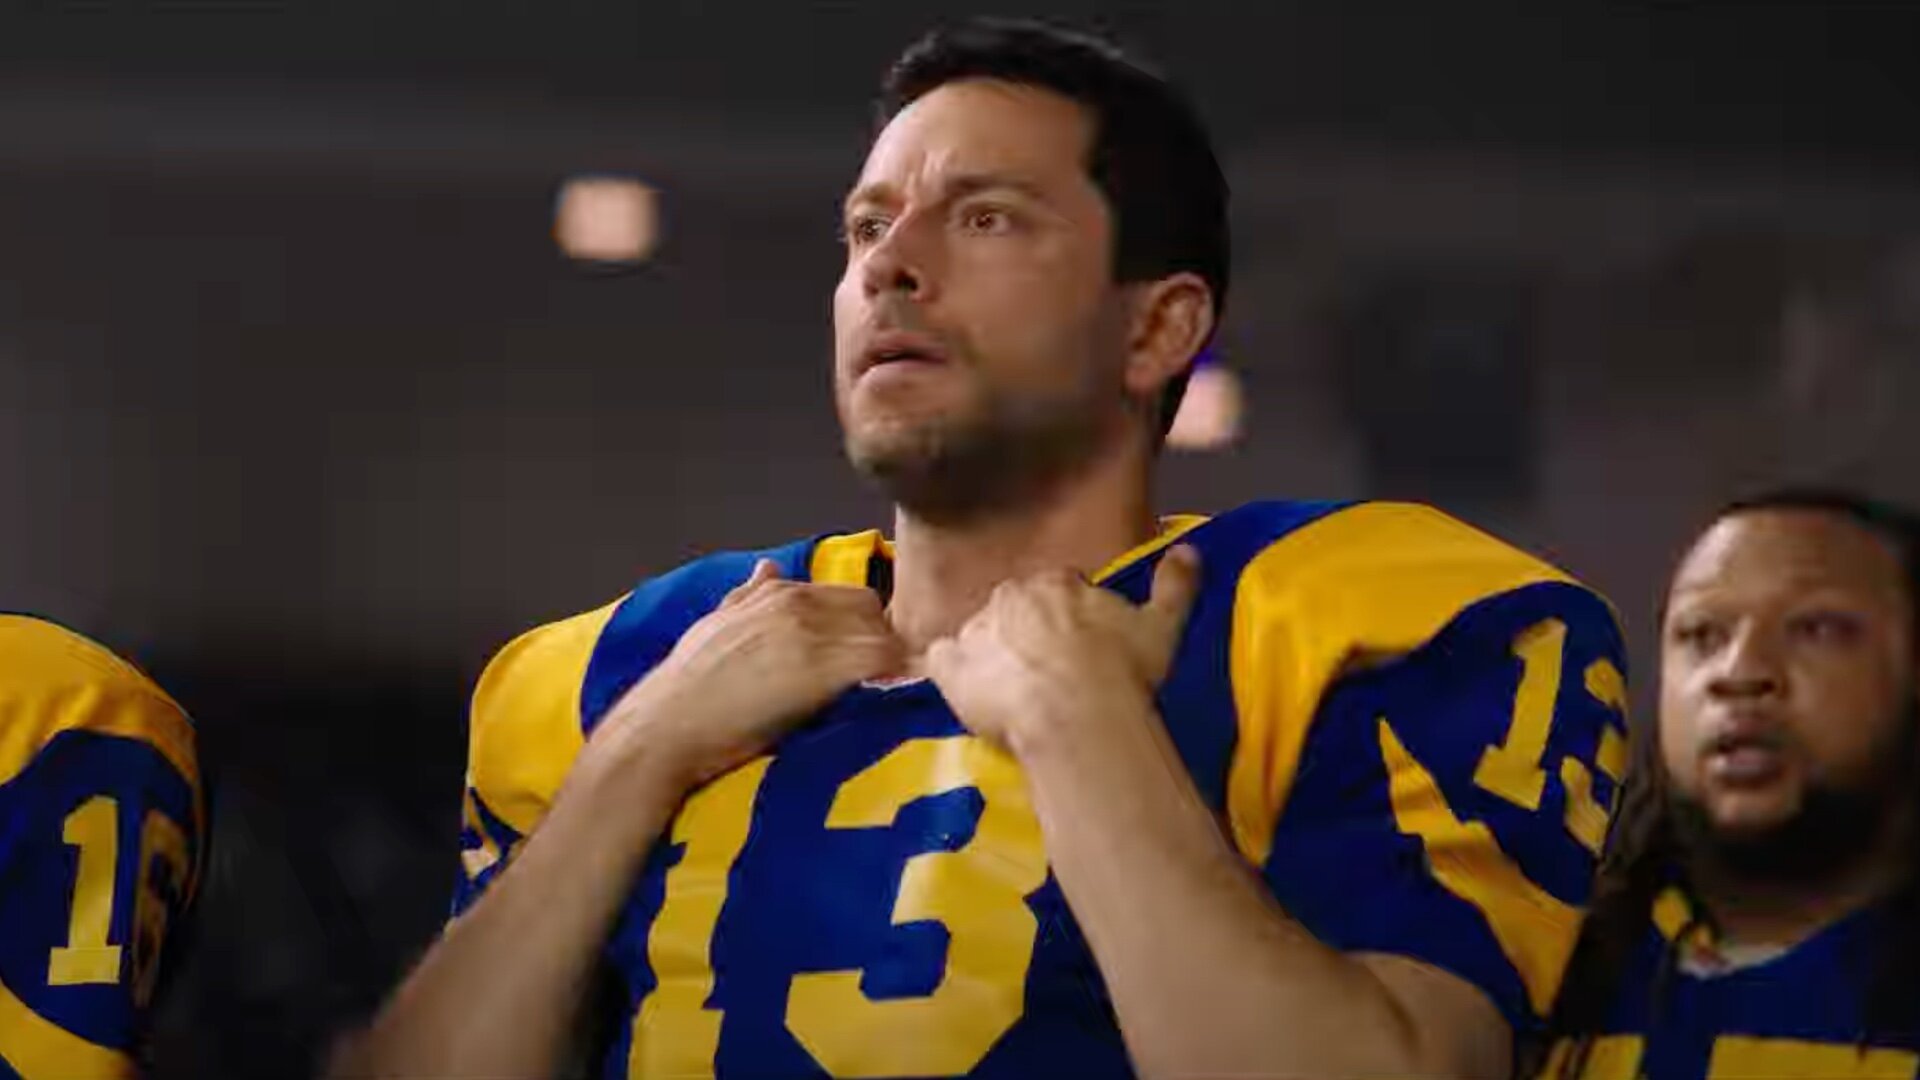 Trailer for Zachary Levi's AMERICAN UNDERDOG Which Tells the Inspiring